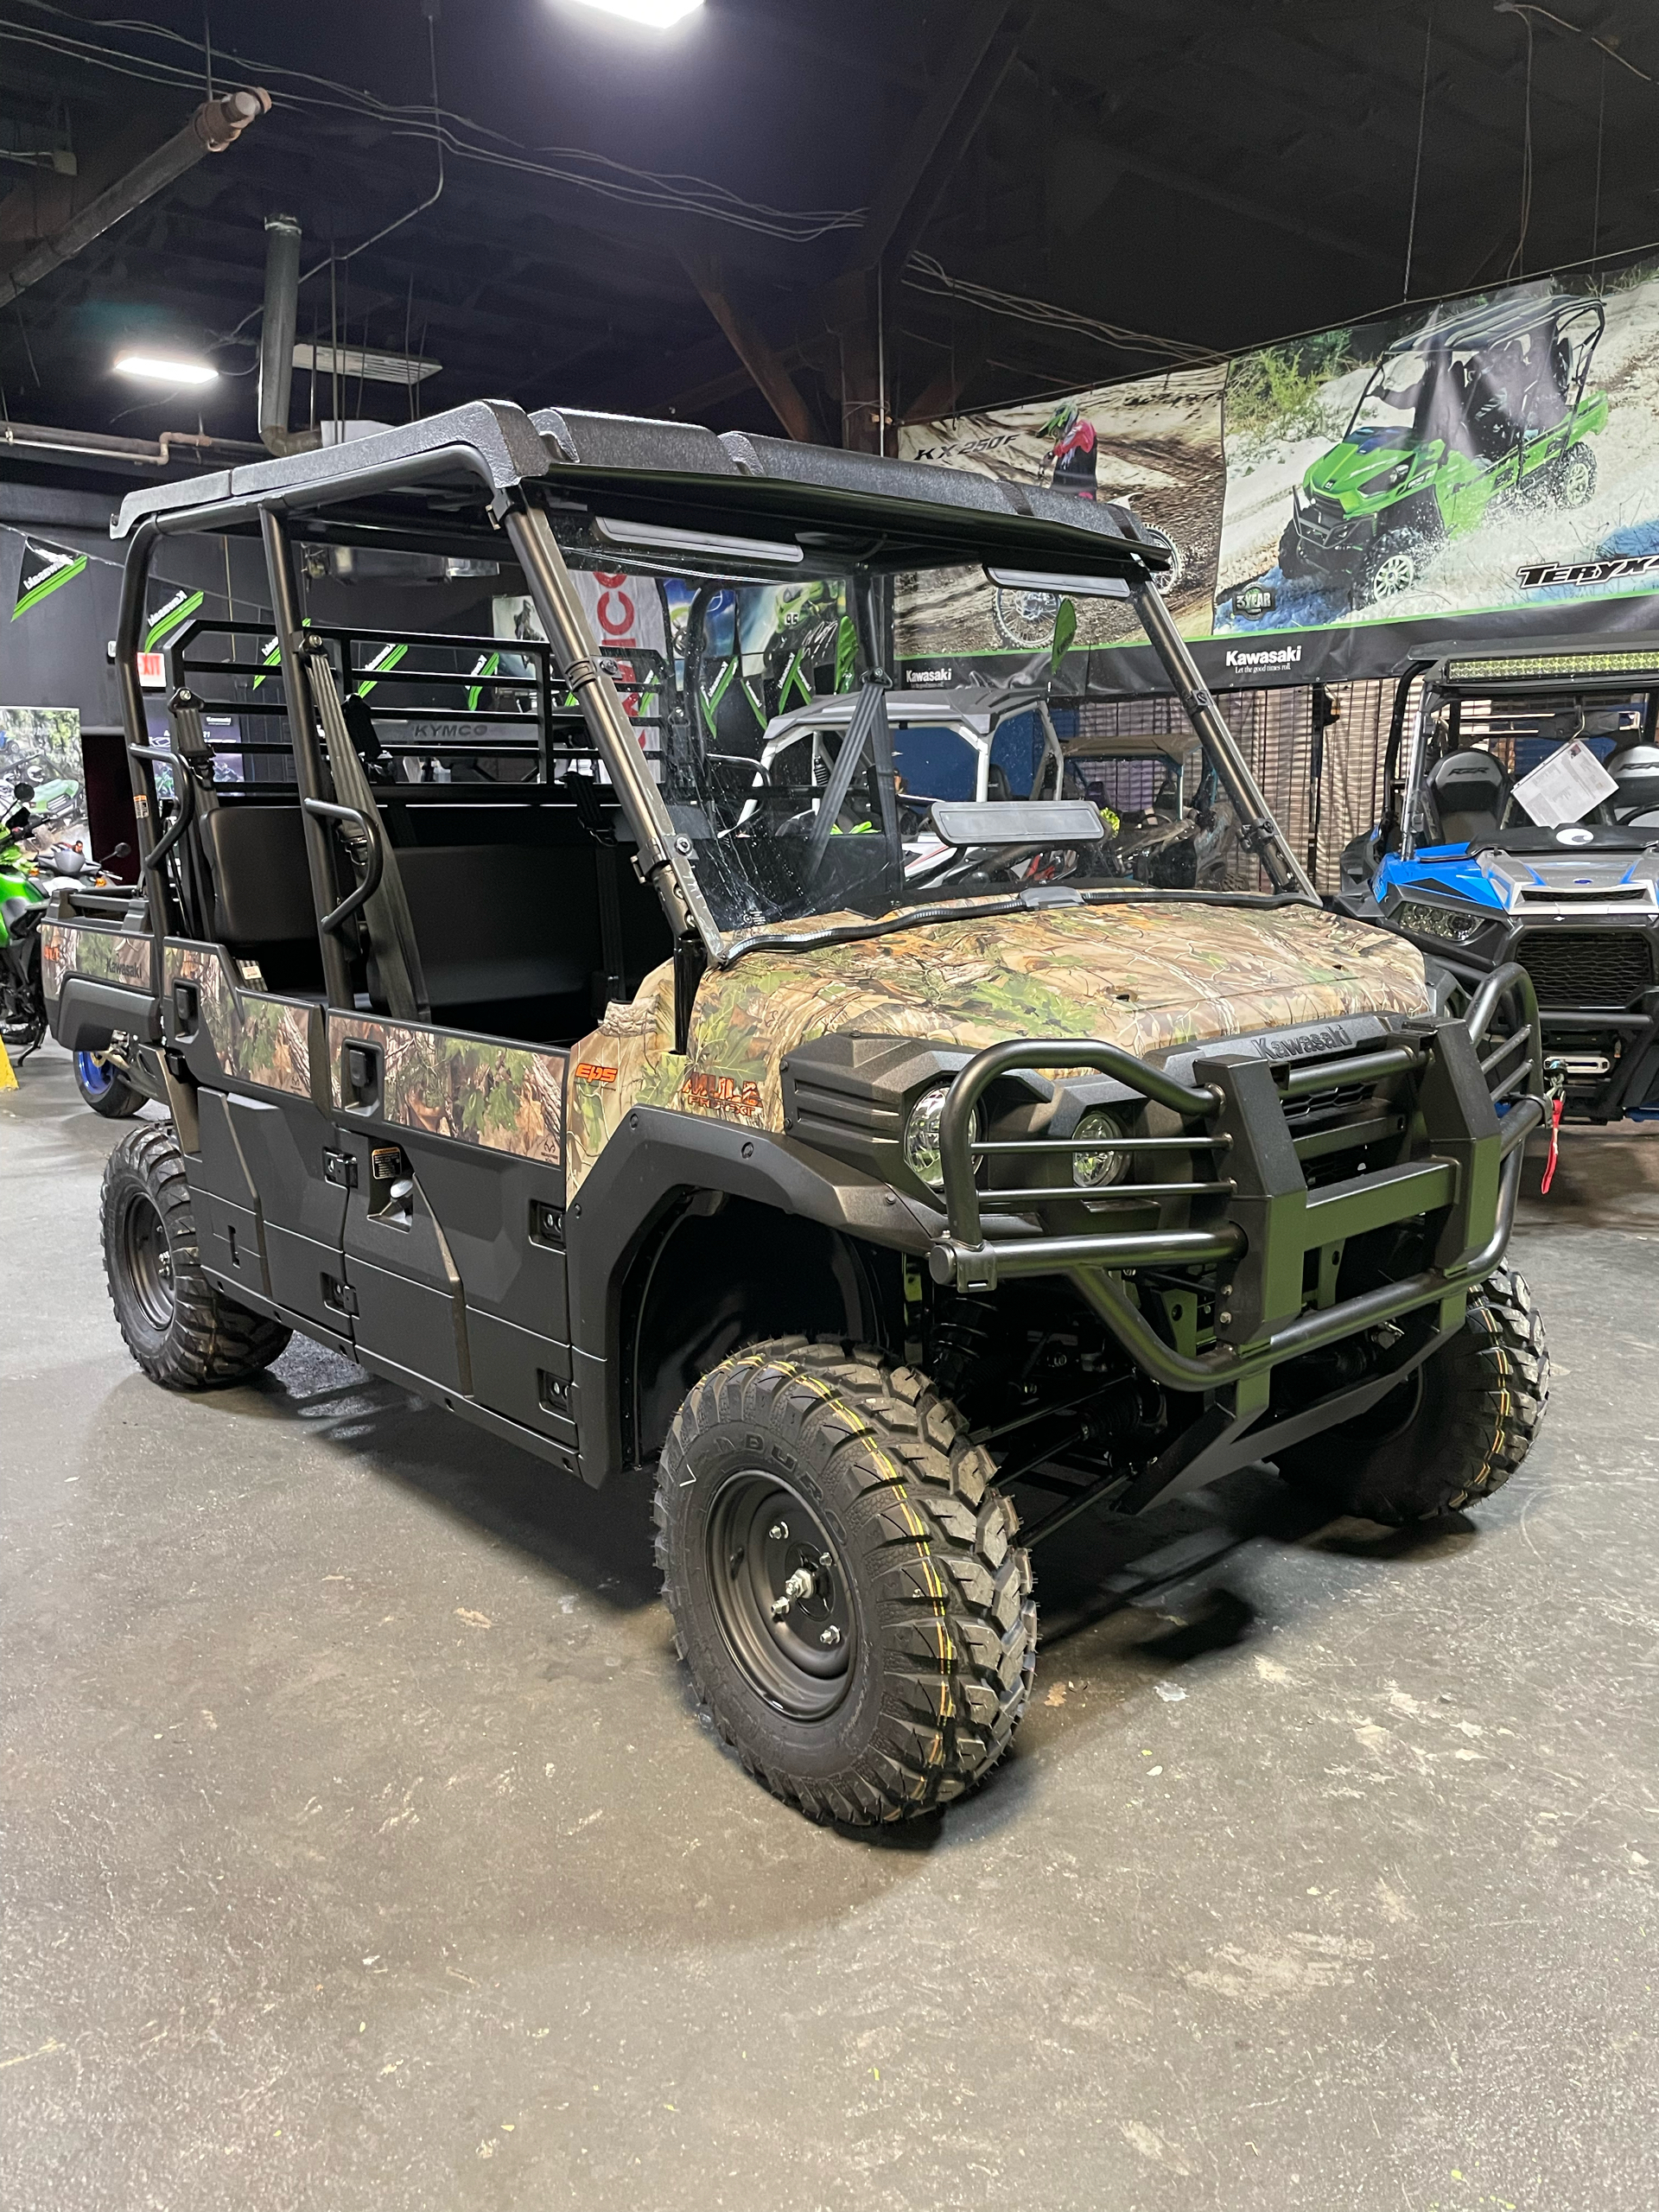 2023 Kawasaki Mule PRO-FXT EPS Camo in Kingsport, Tennessee - Photo 1